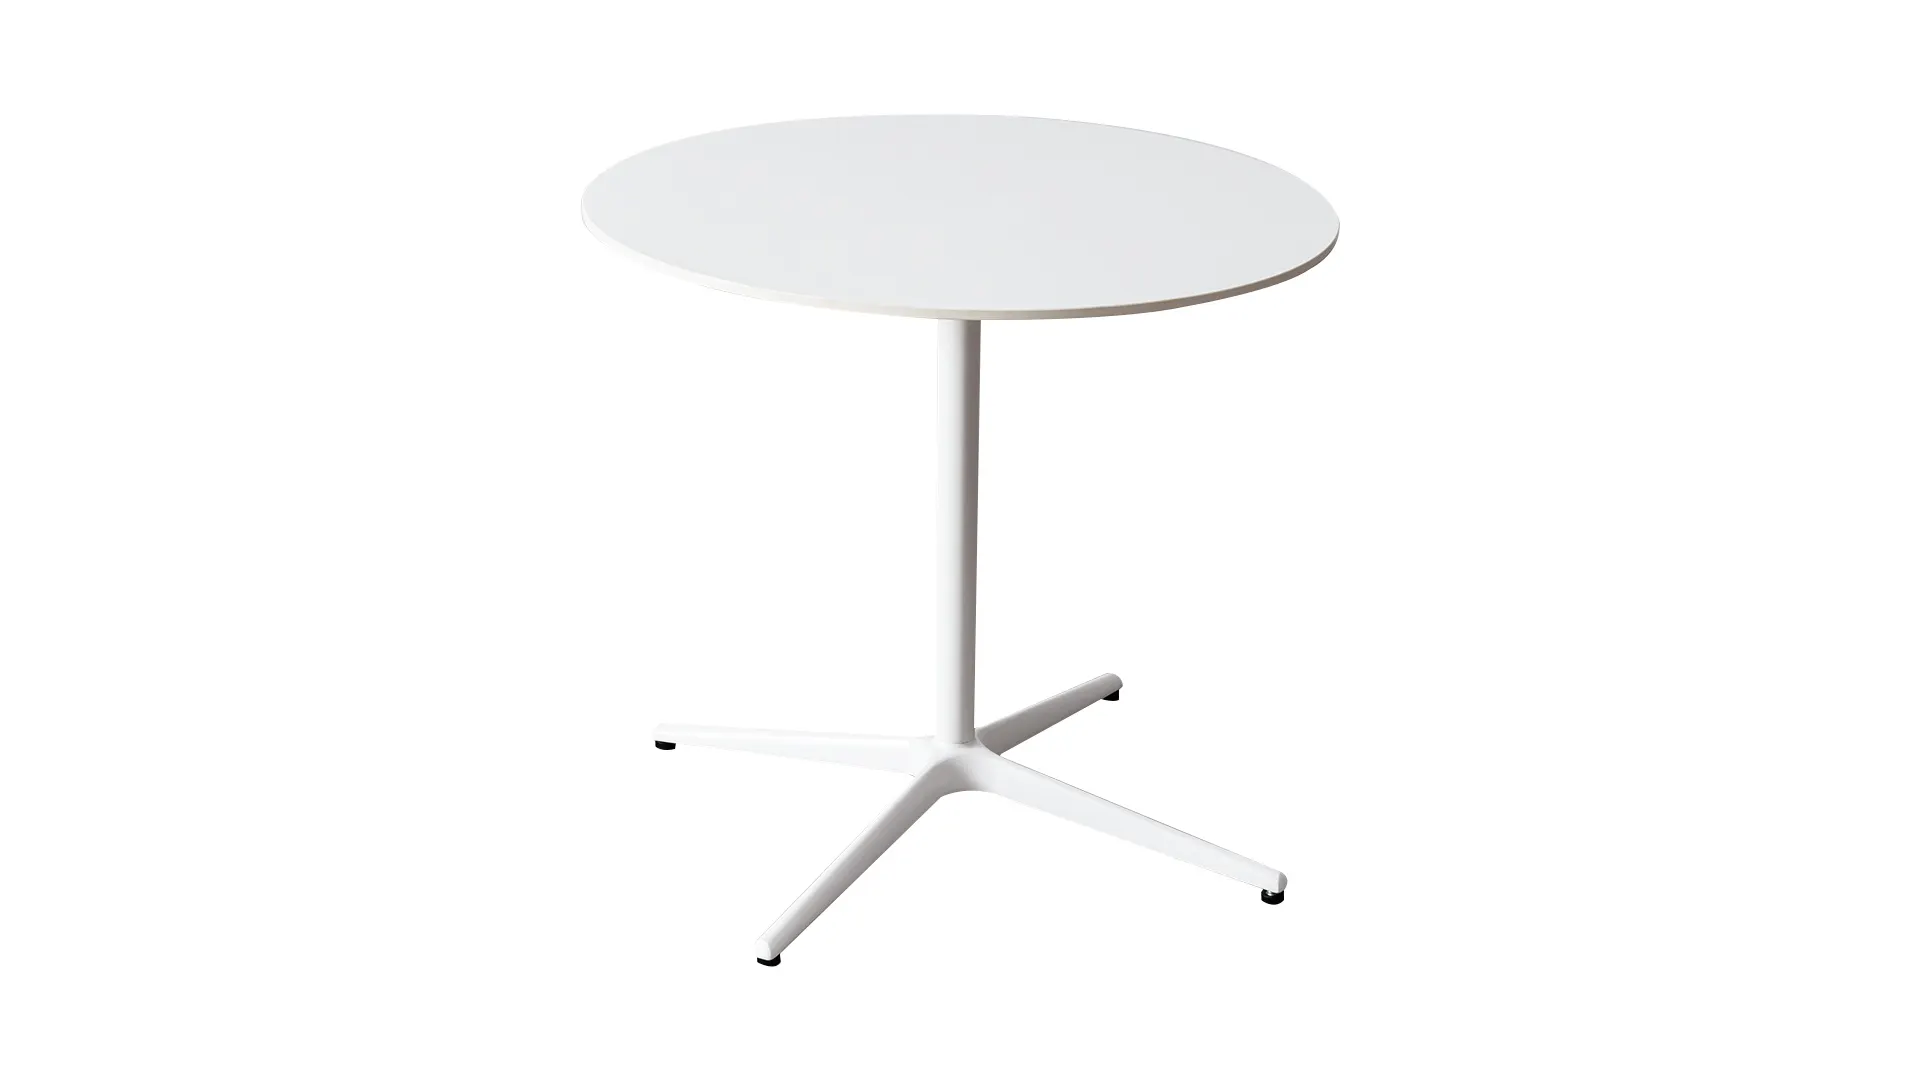 Innovation Round -S  Simple Design Living room Table With Ceramic Table Top  BK Ciandre 1